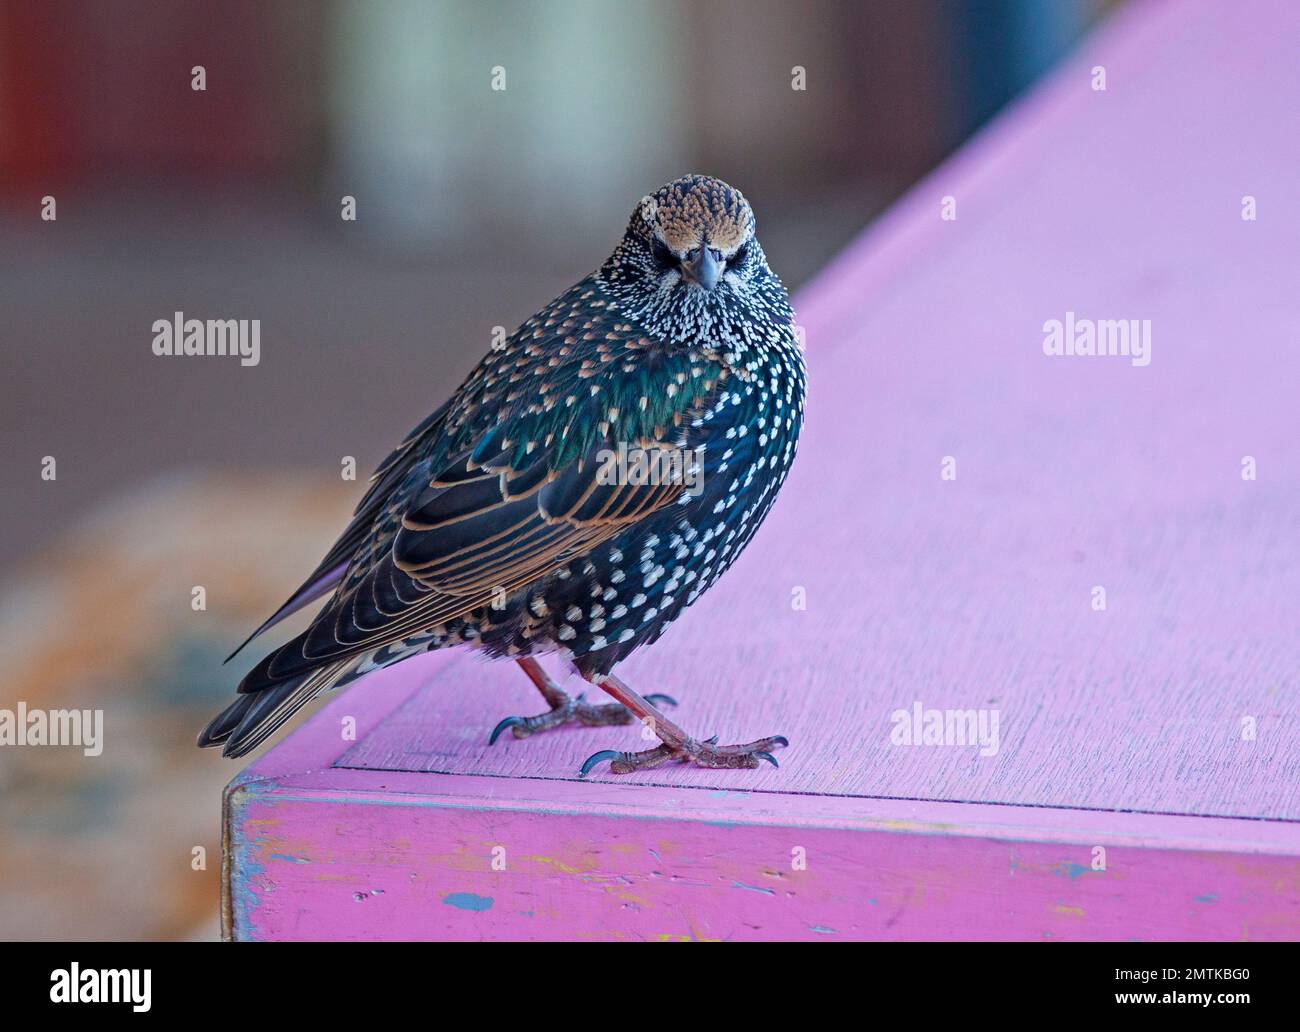 Portobello, Edinburgh, Scotland, UK. 1st February 2023. Chilly sunshine and  7 degrees with real feel 2 degrees centigrade at the seaside by the Firth of Forth. Pictured: Pretty in pink,  Young Starling in Winter plumage hoping for some scraps from the beach cafe customers. Credit: Scottishcreative/alamy live news. Stock Photo